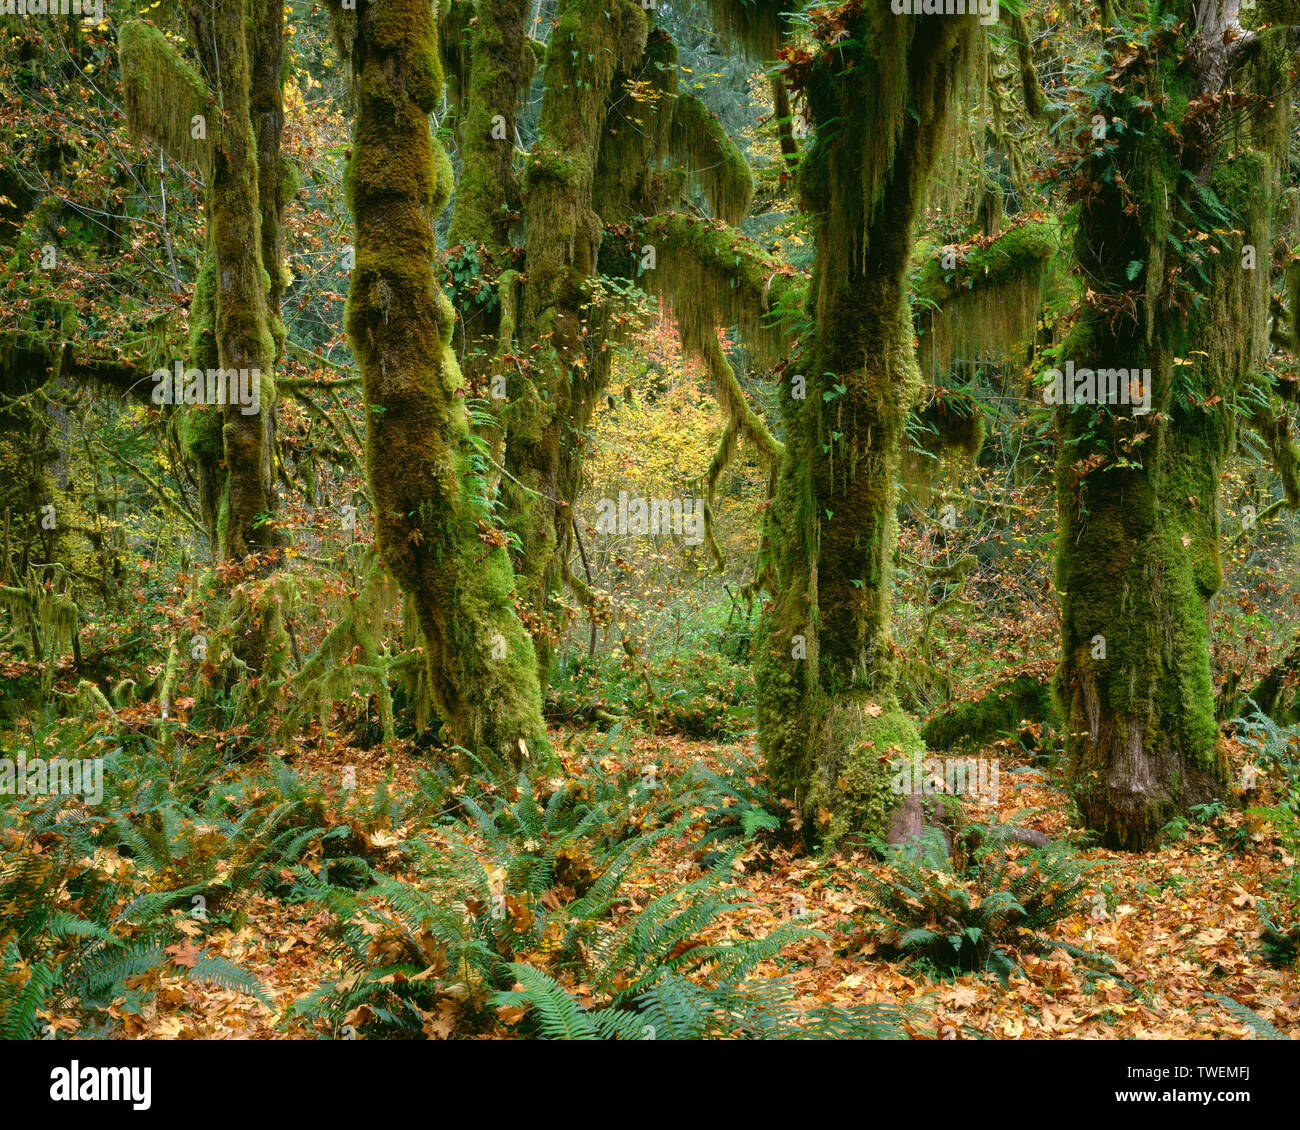 USA, Washington, Olympic National Park, Moss clings to bigleaf maple in autumn; Hoh Rain Forest. Stock Photo